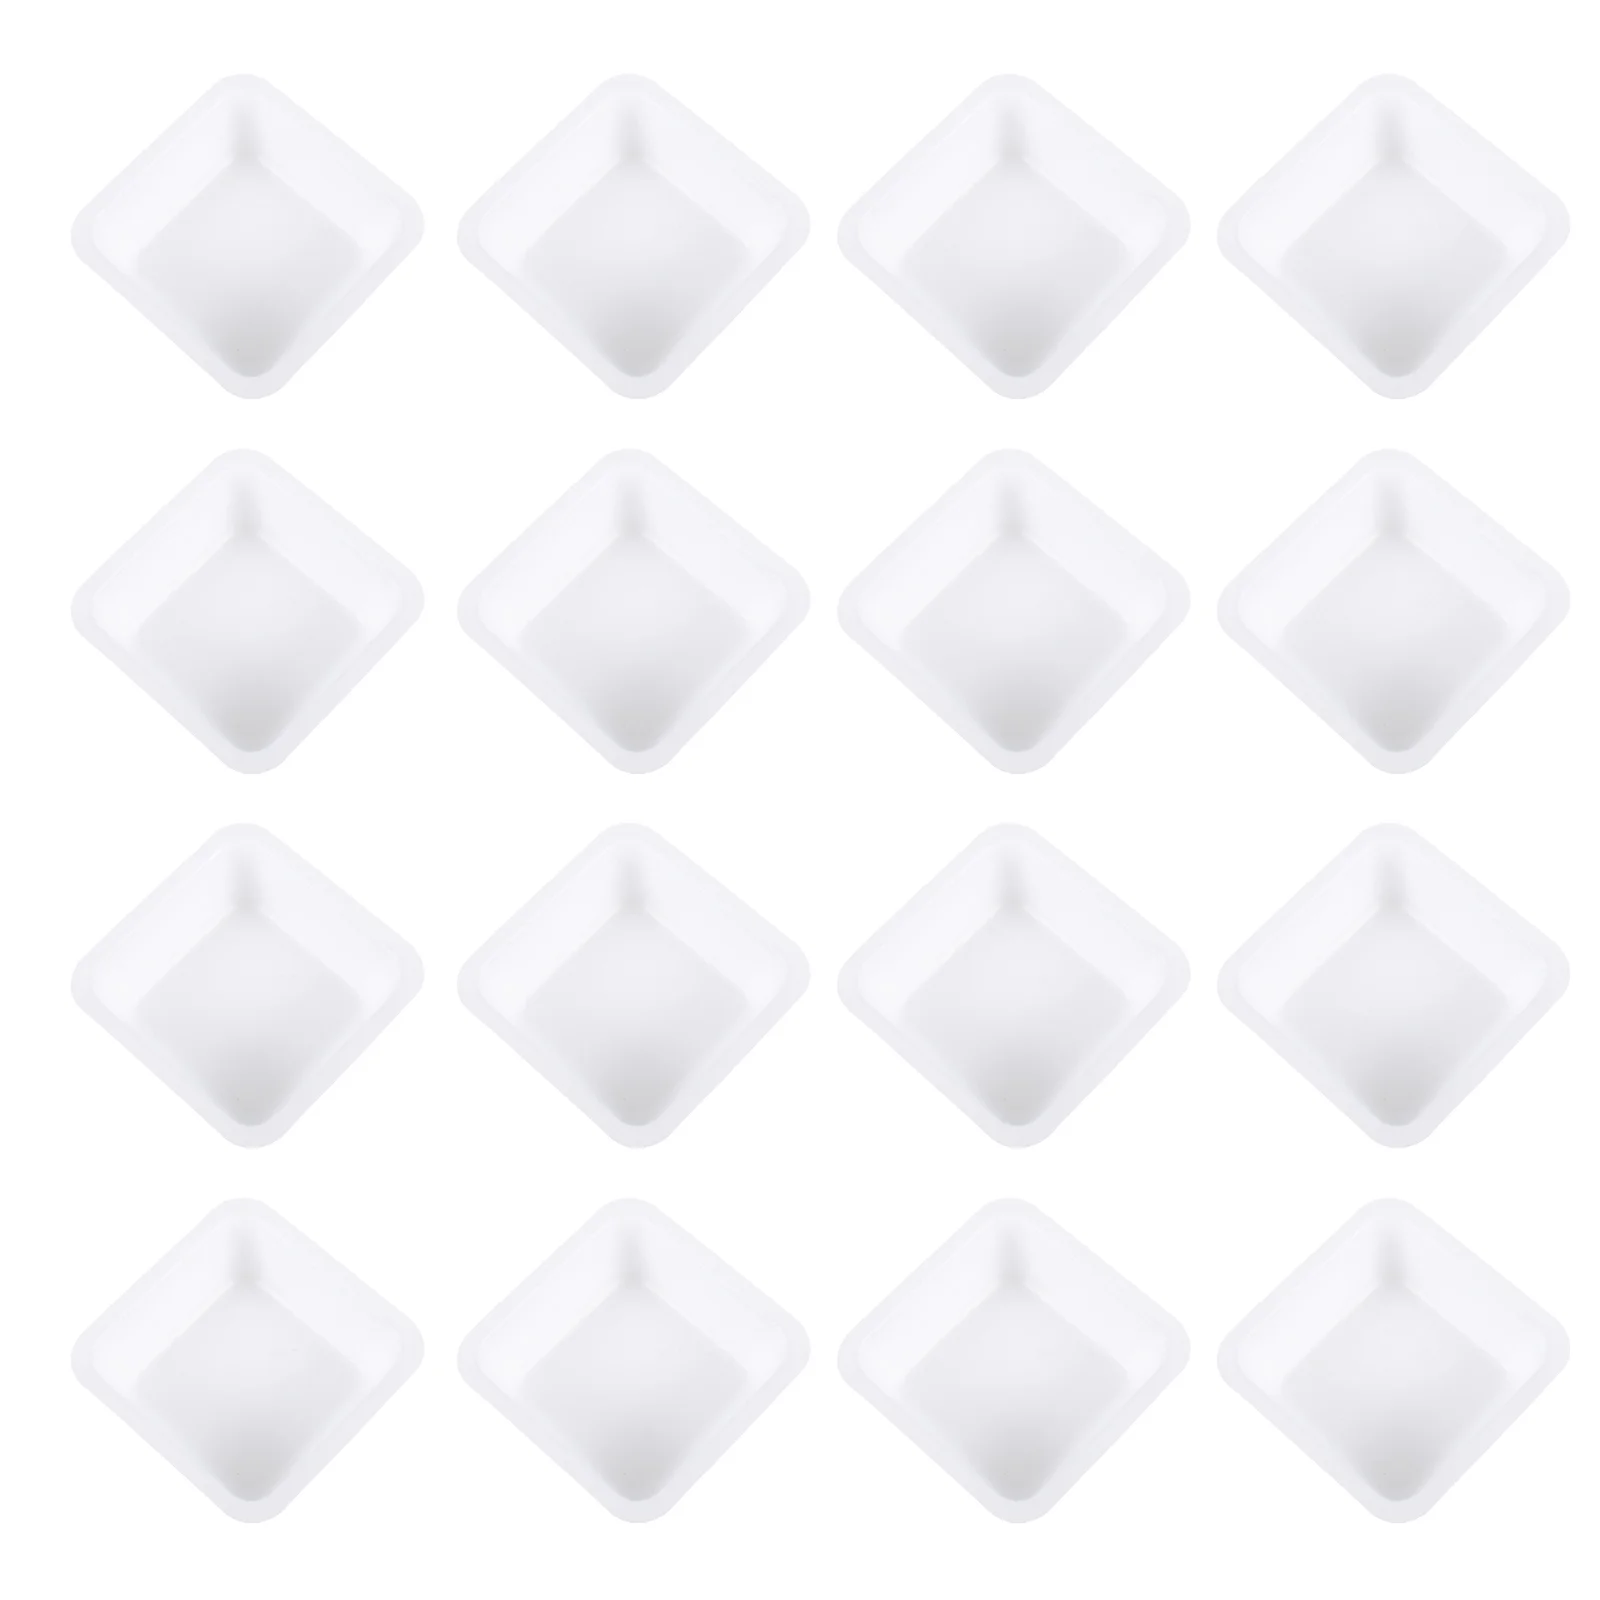 

50 Pcs Weighing Pan Anti-Static Boat Plate Tray Square Disposable Plates Petri Dish Plastic Serving Trays Lab supplies